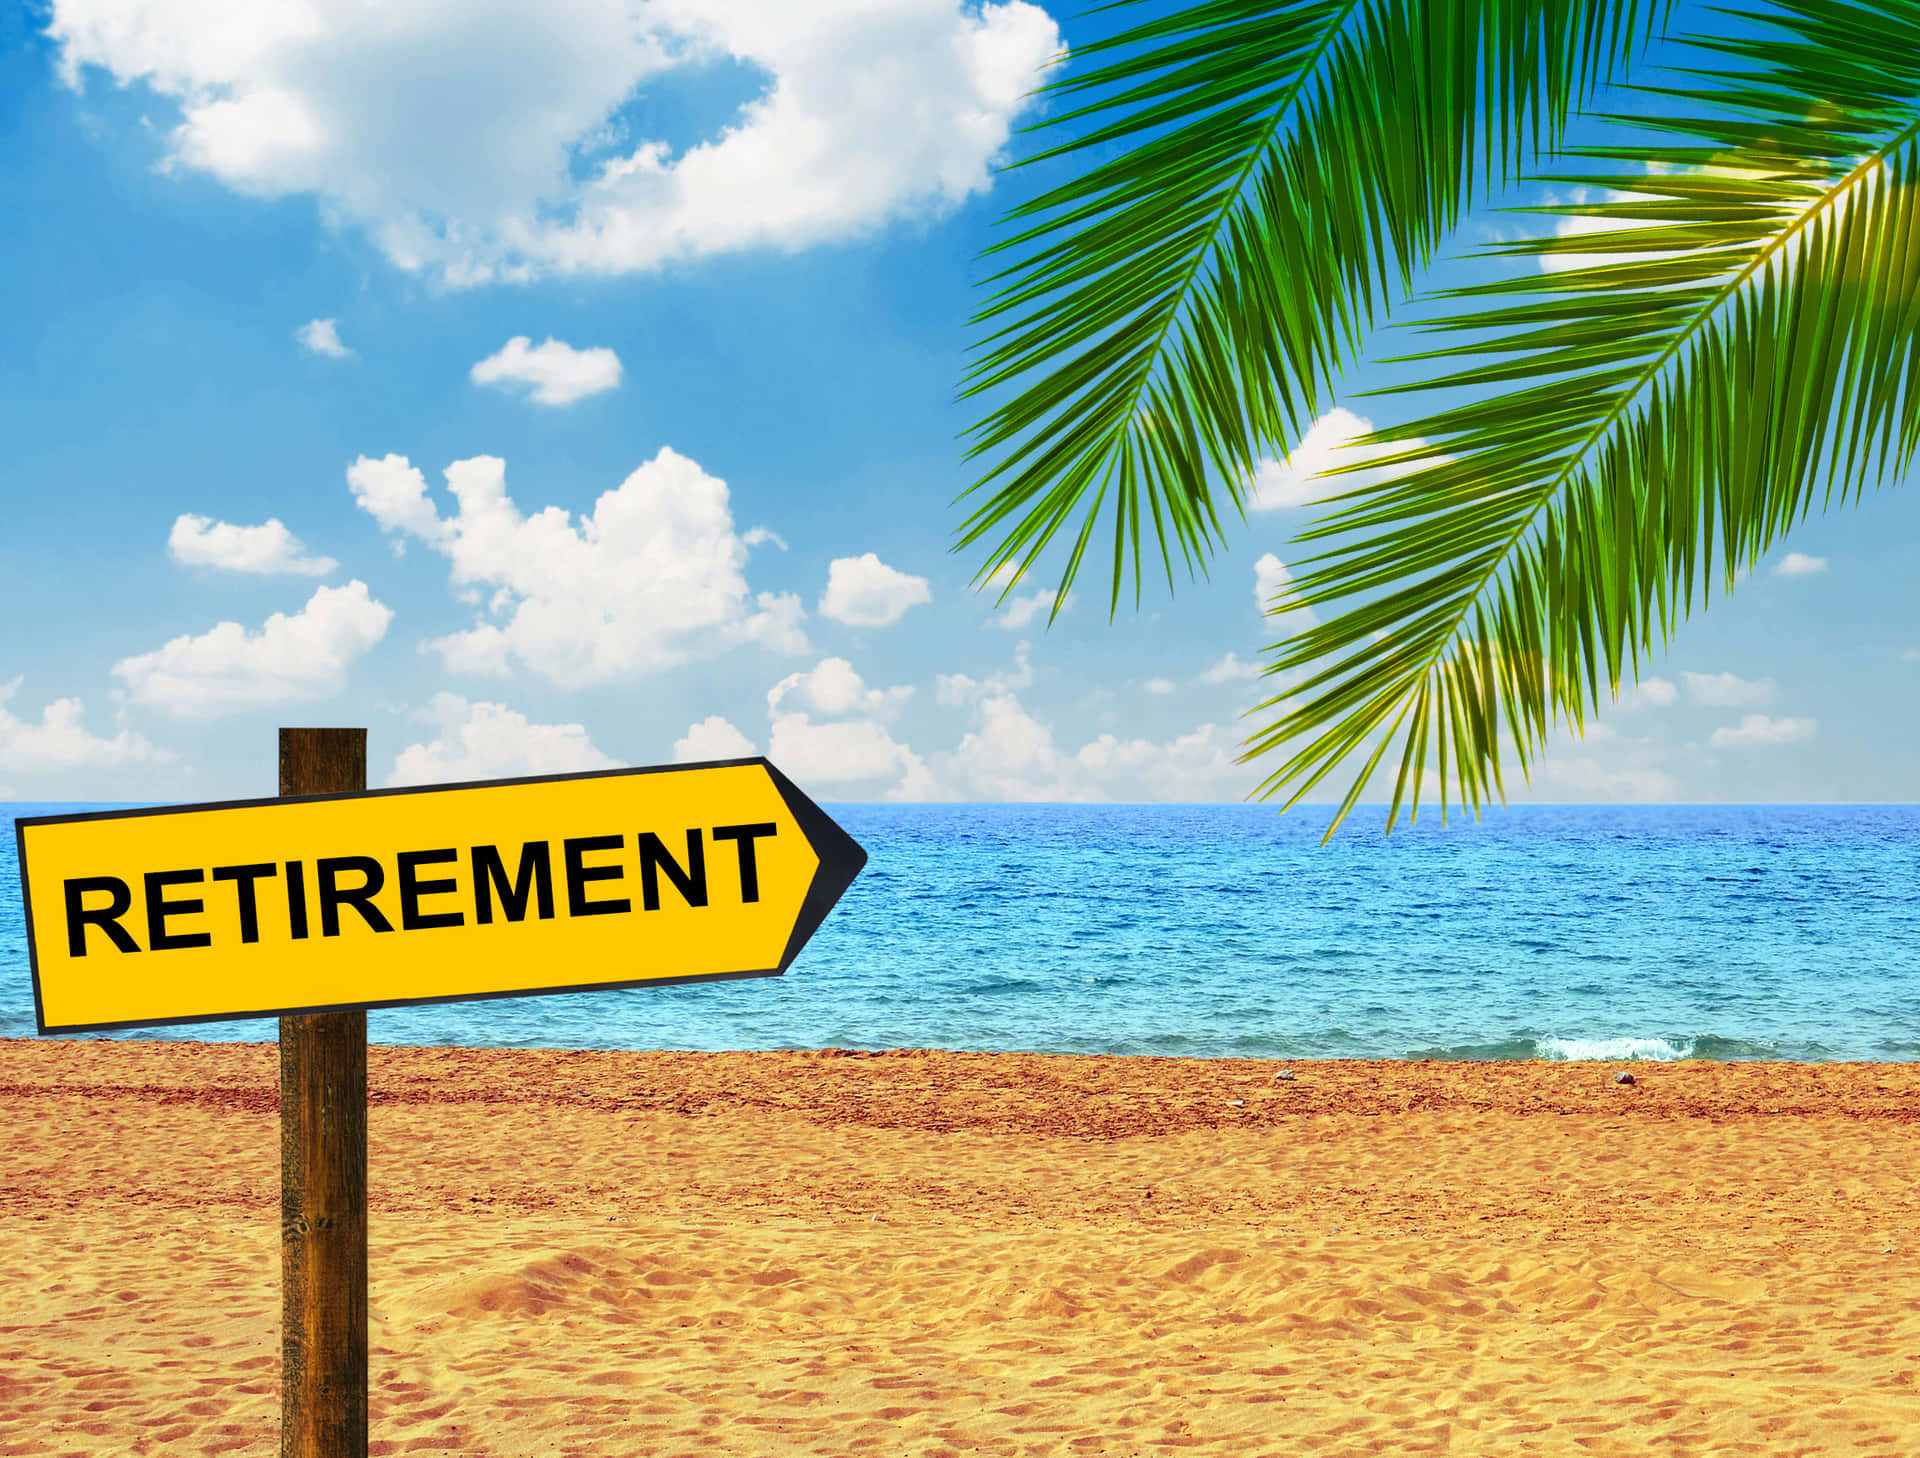 Retirement – The Time for New Experiences